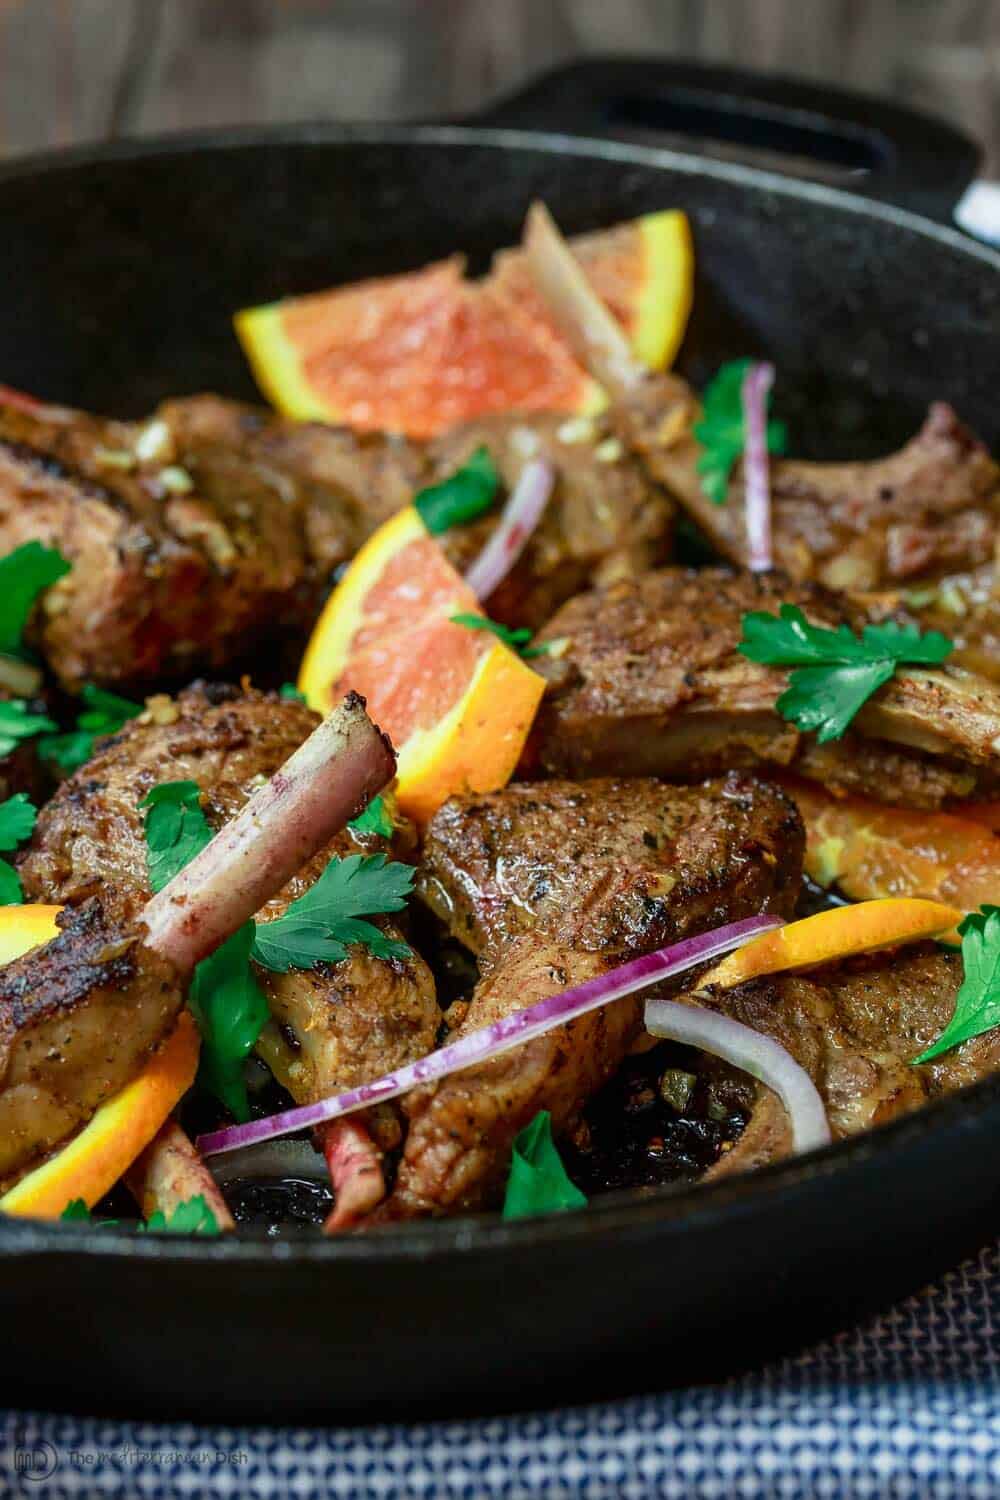 Orange Harissa Lamb Chops, cooked in skillet. Garnish with orange slices and red onion